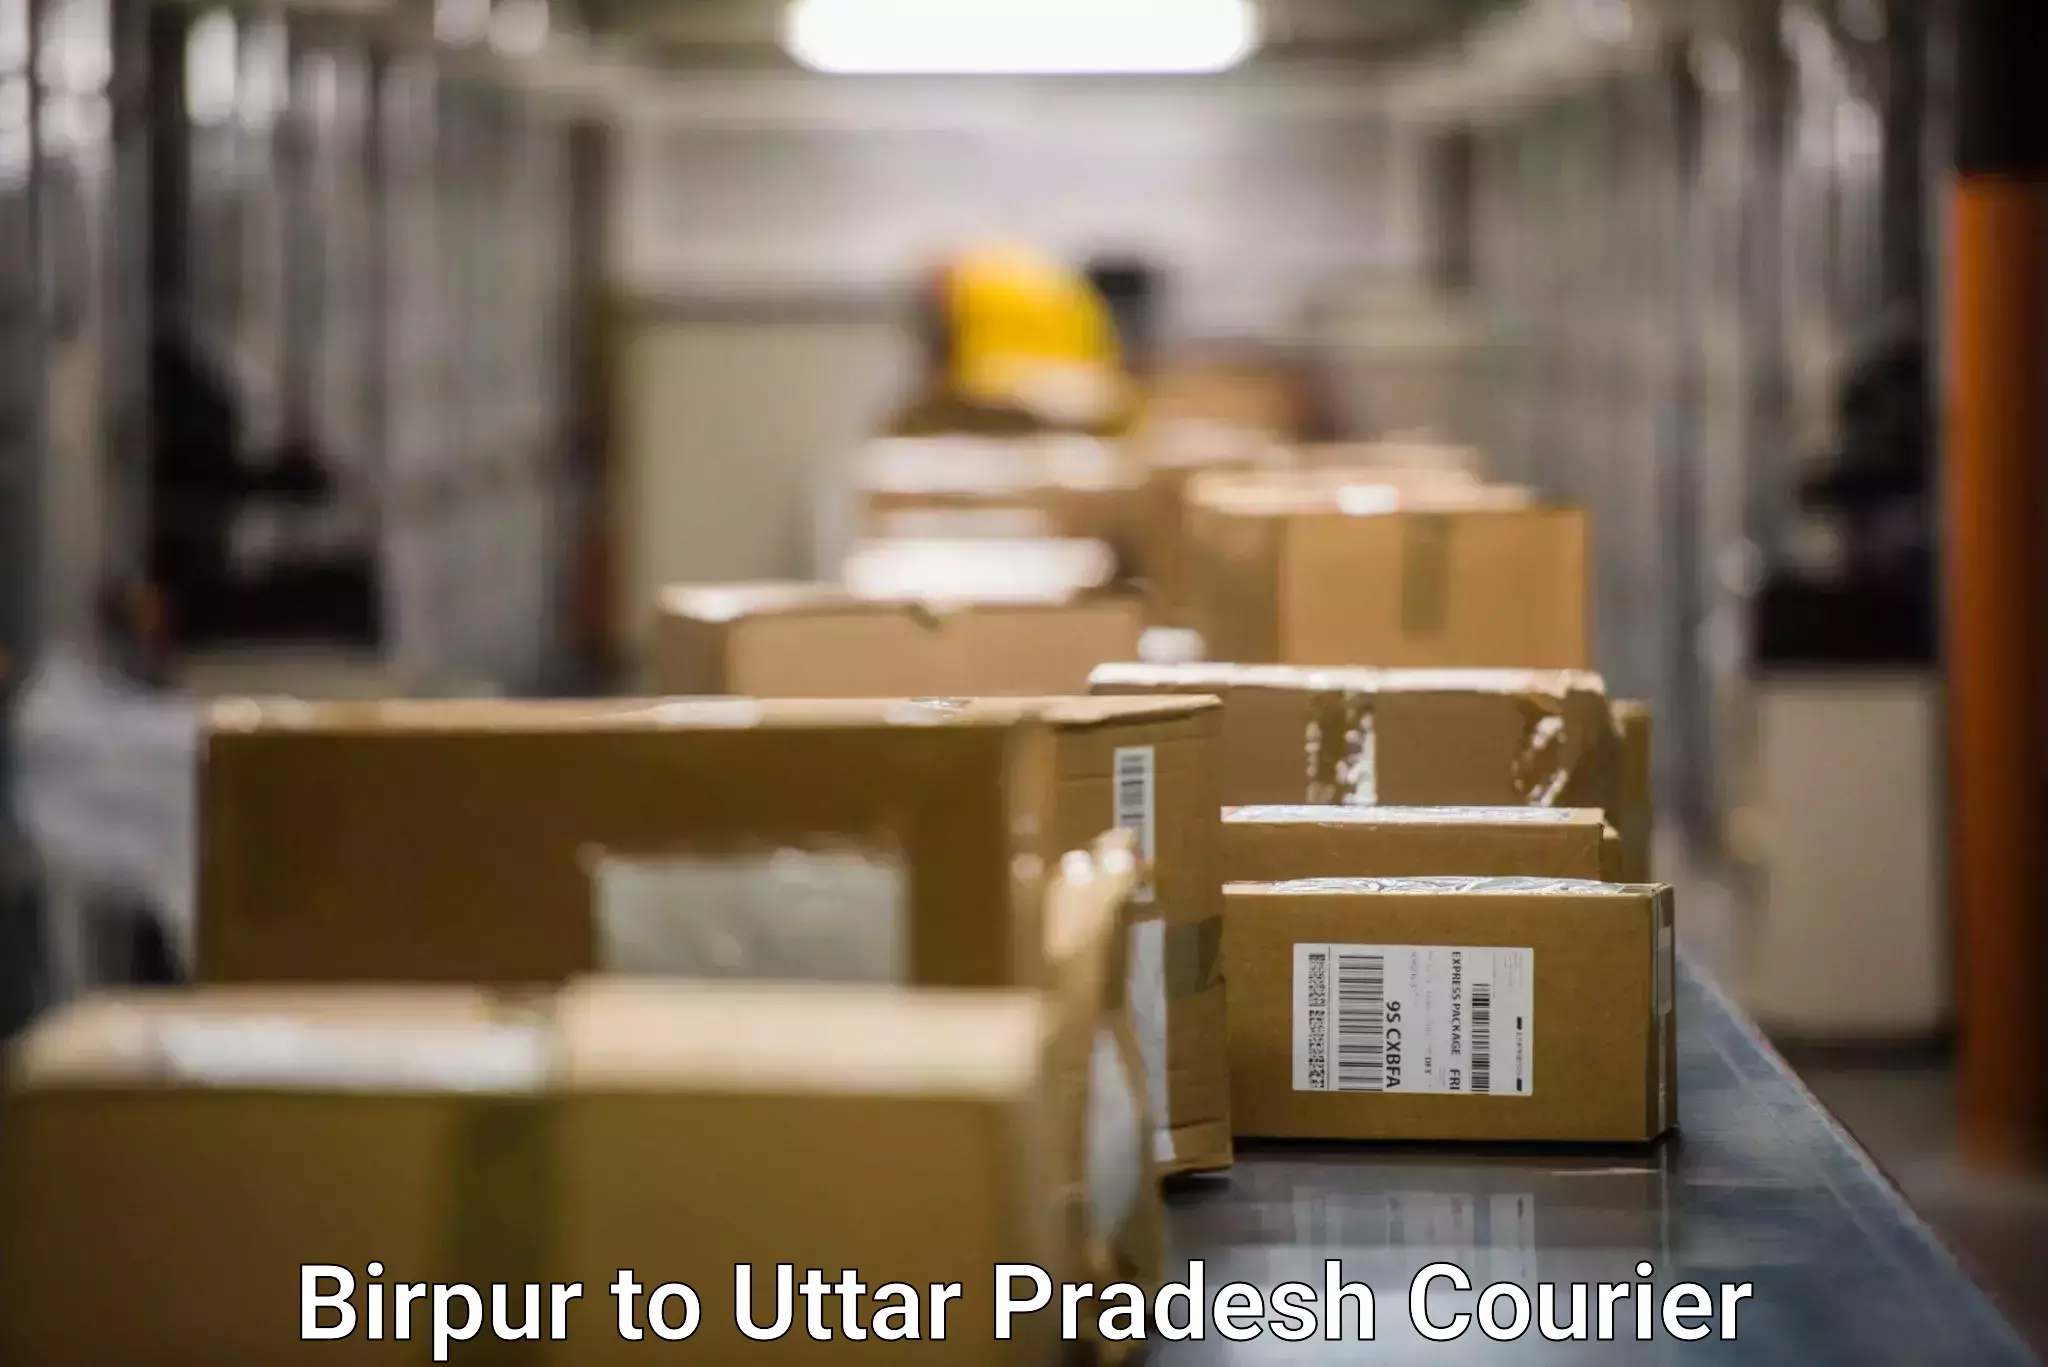 State-of-the-art courier technology Birpur to Anpara